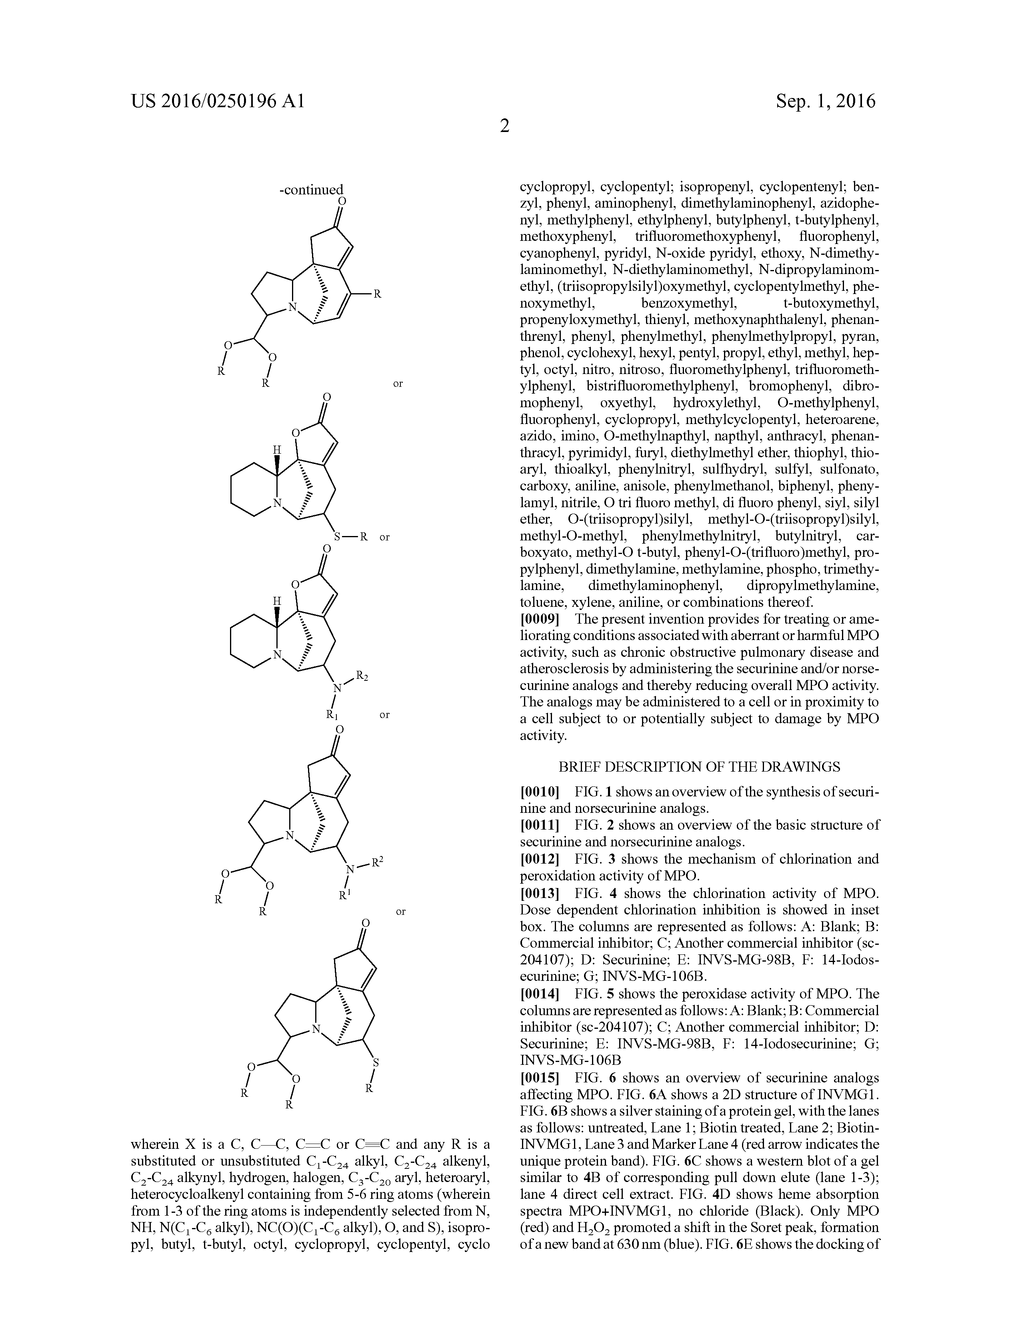 SMALL MOLECULE SECURININE AND NORSECURININE ANALOGS AND THEIR USE IN     INHIBITING MYELOPEROXIDASE - diagram, schematic, and image 11